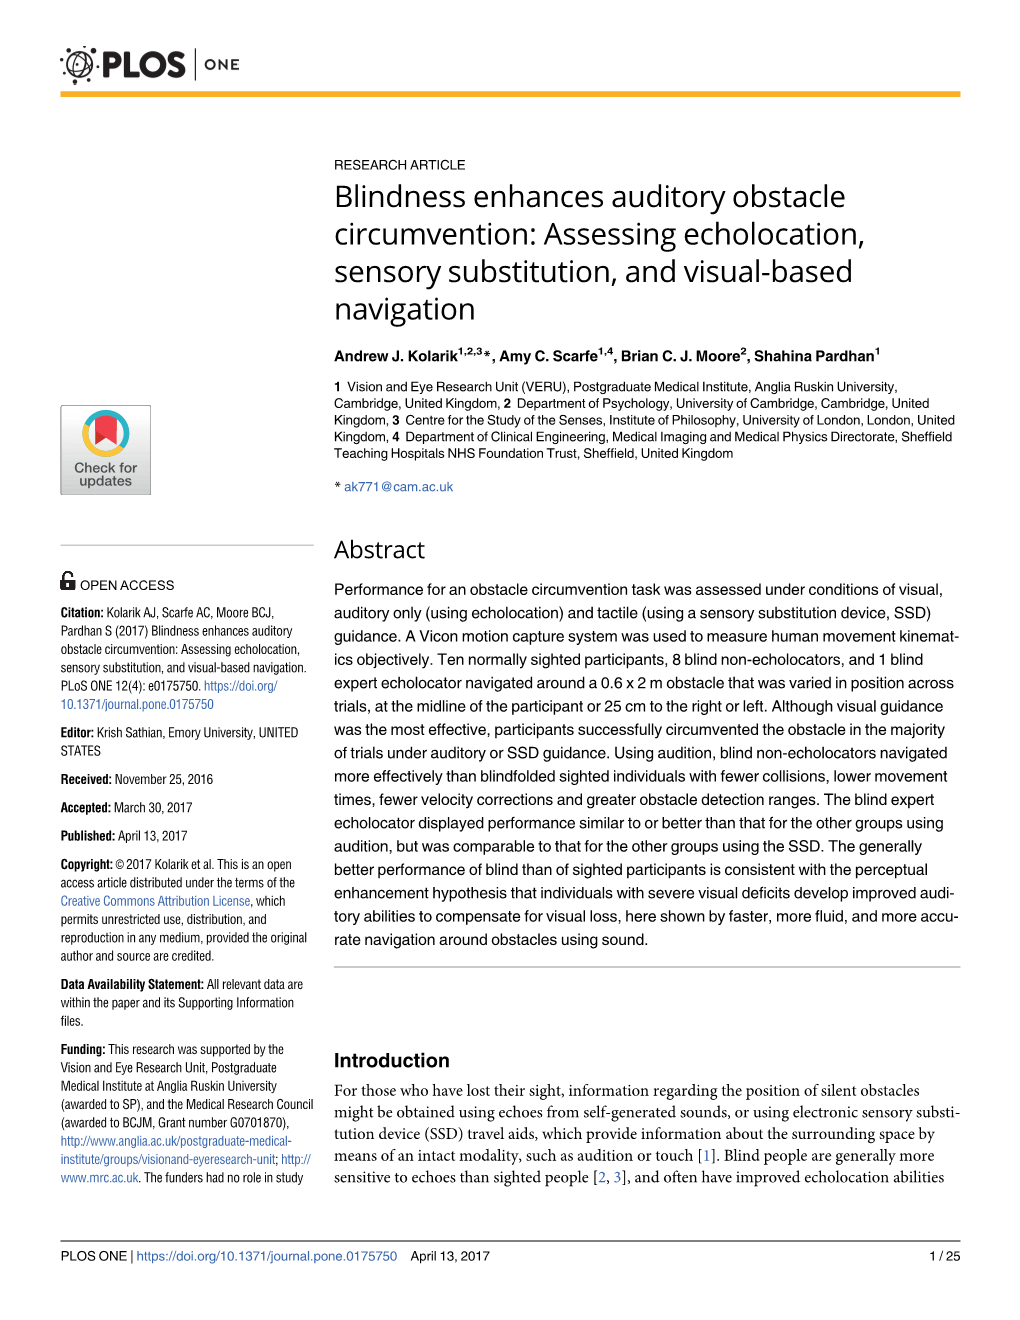 Blindness Enhances Auditory Obstacle Circumvention: Assessing Echolocation, Sensory Substitution, and Visual-Based Navigation